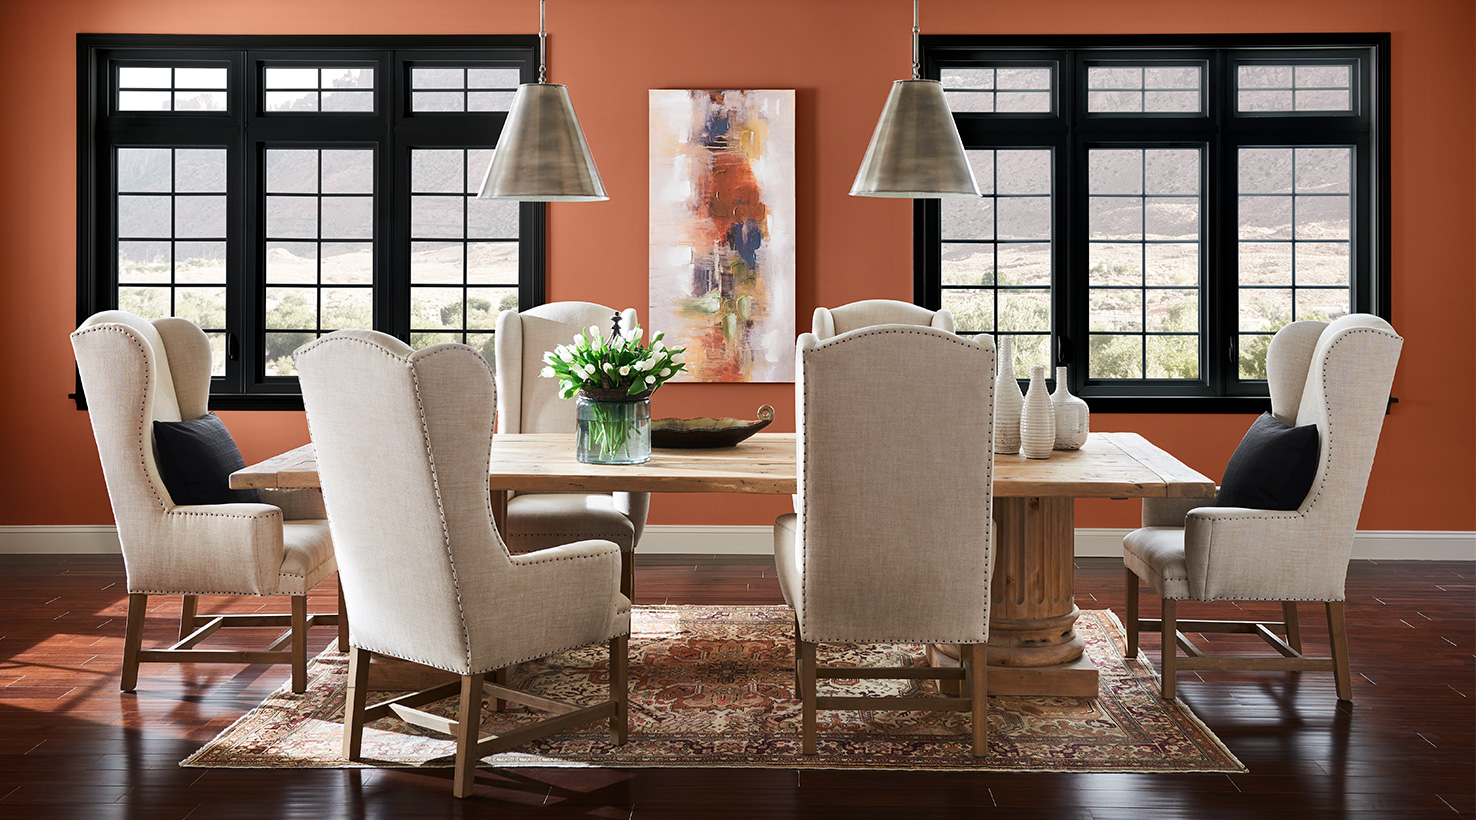 Dining Room Paint Color Ideas, What Are Good Dining Room Colors